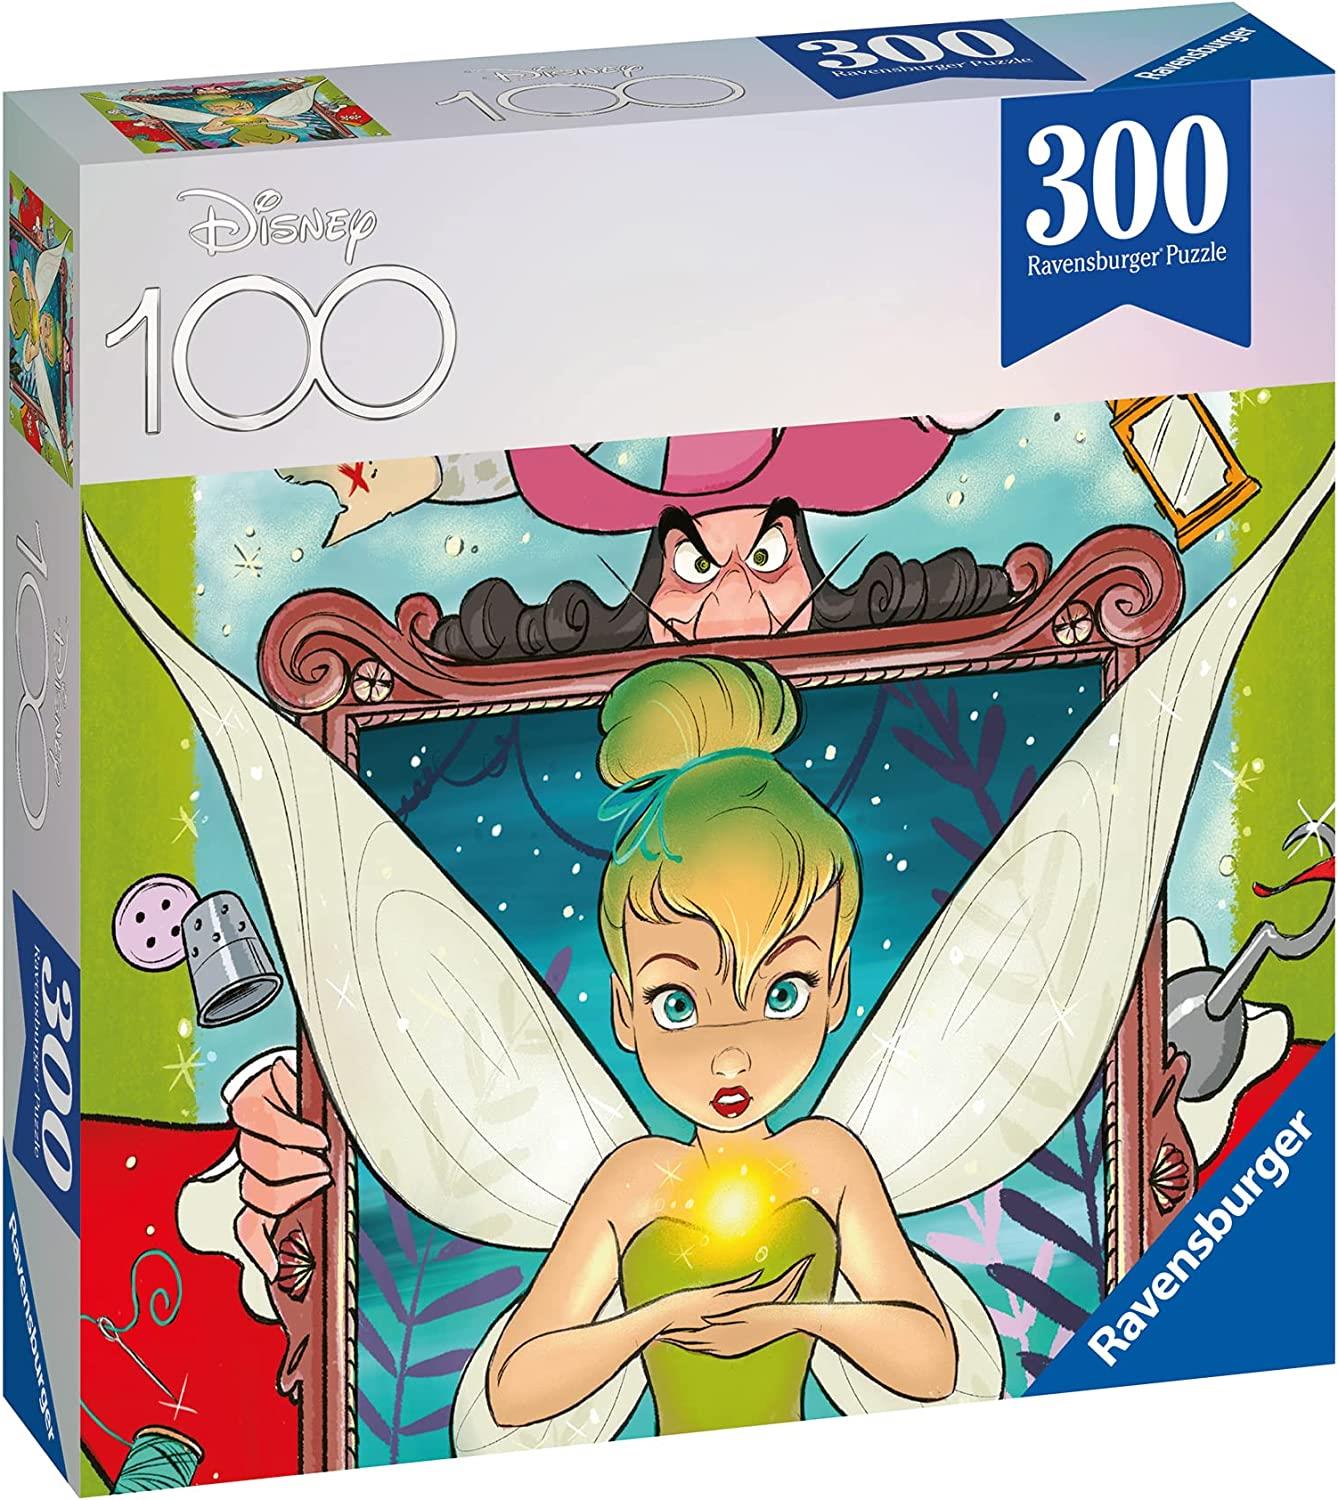 Ravensburger Disney 100th Anniversary Tinkerbell Jigsaw Puzzle (300 Pieces)